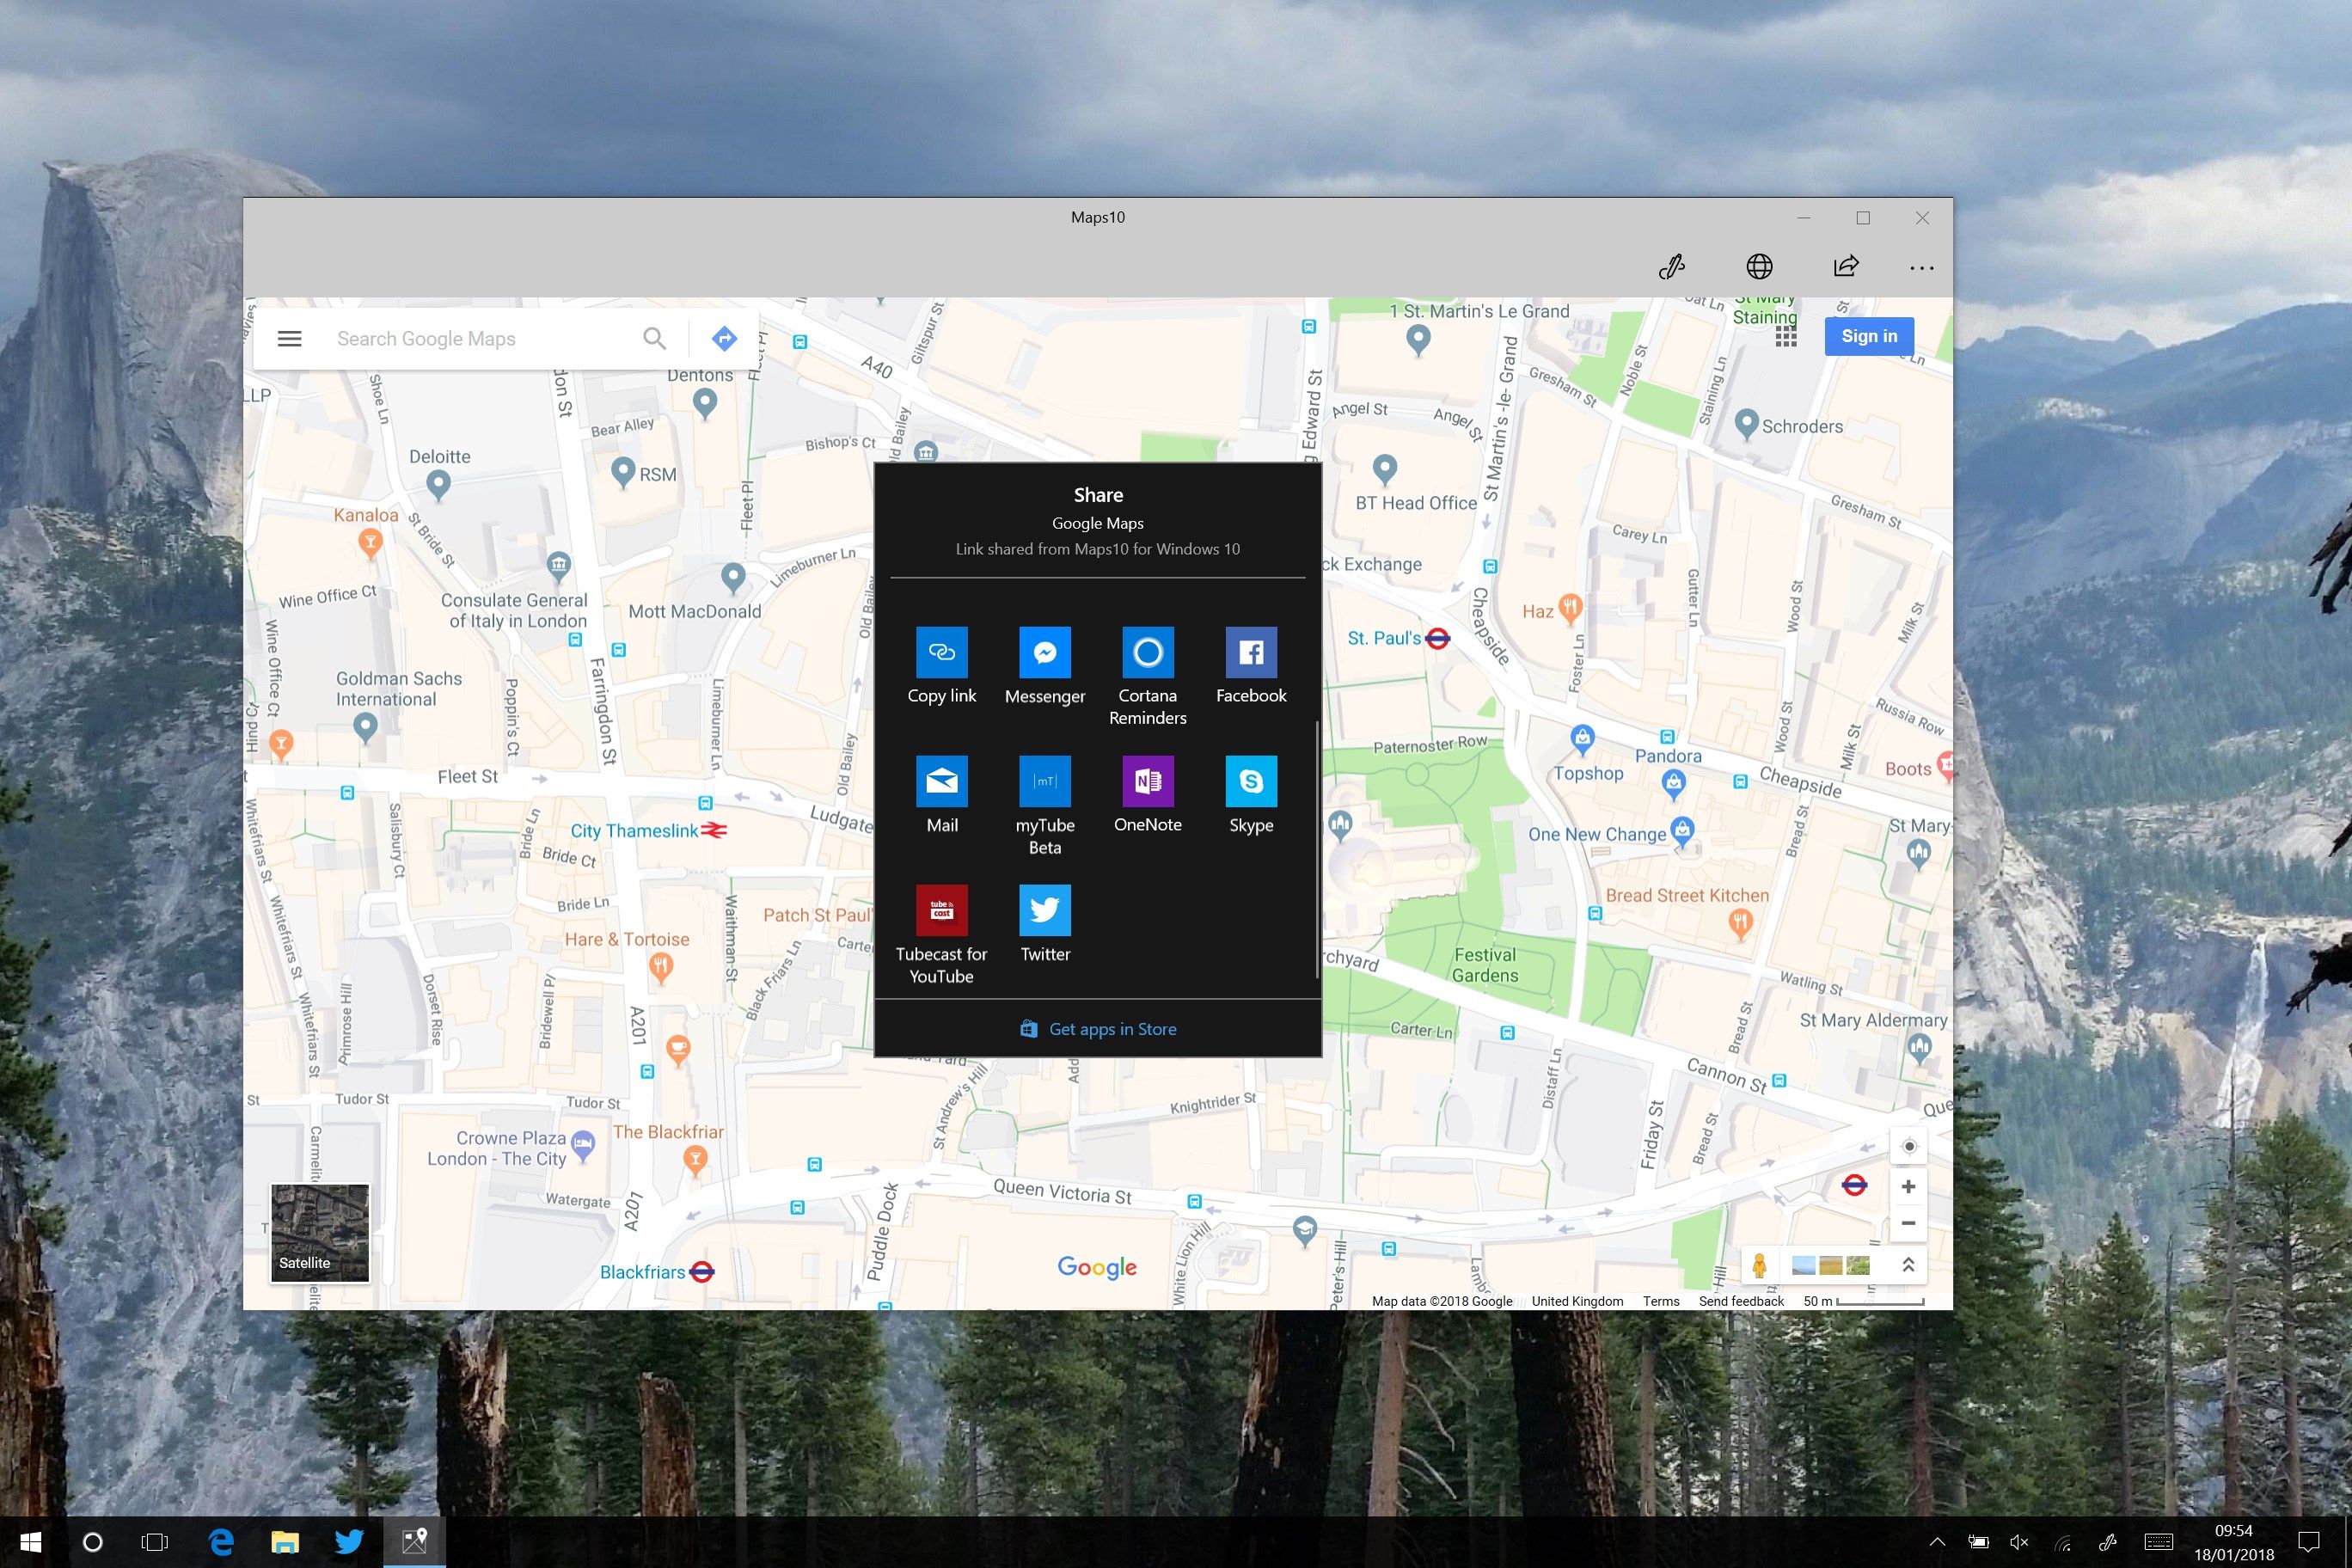 Share the location you are viewing as a Google Maps link, so anyone can see what you're seeing.